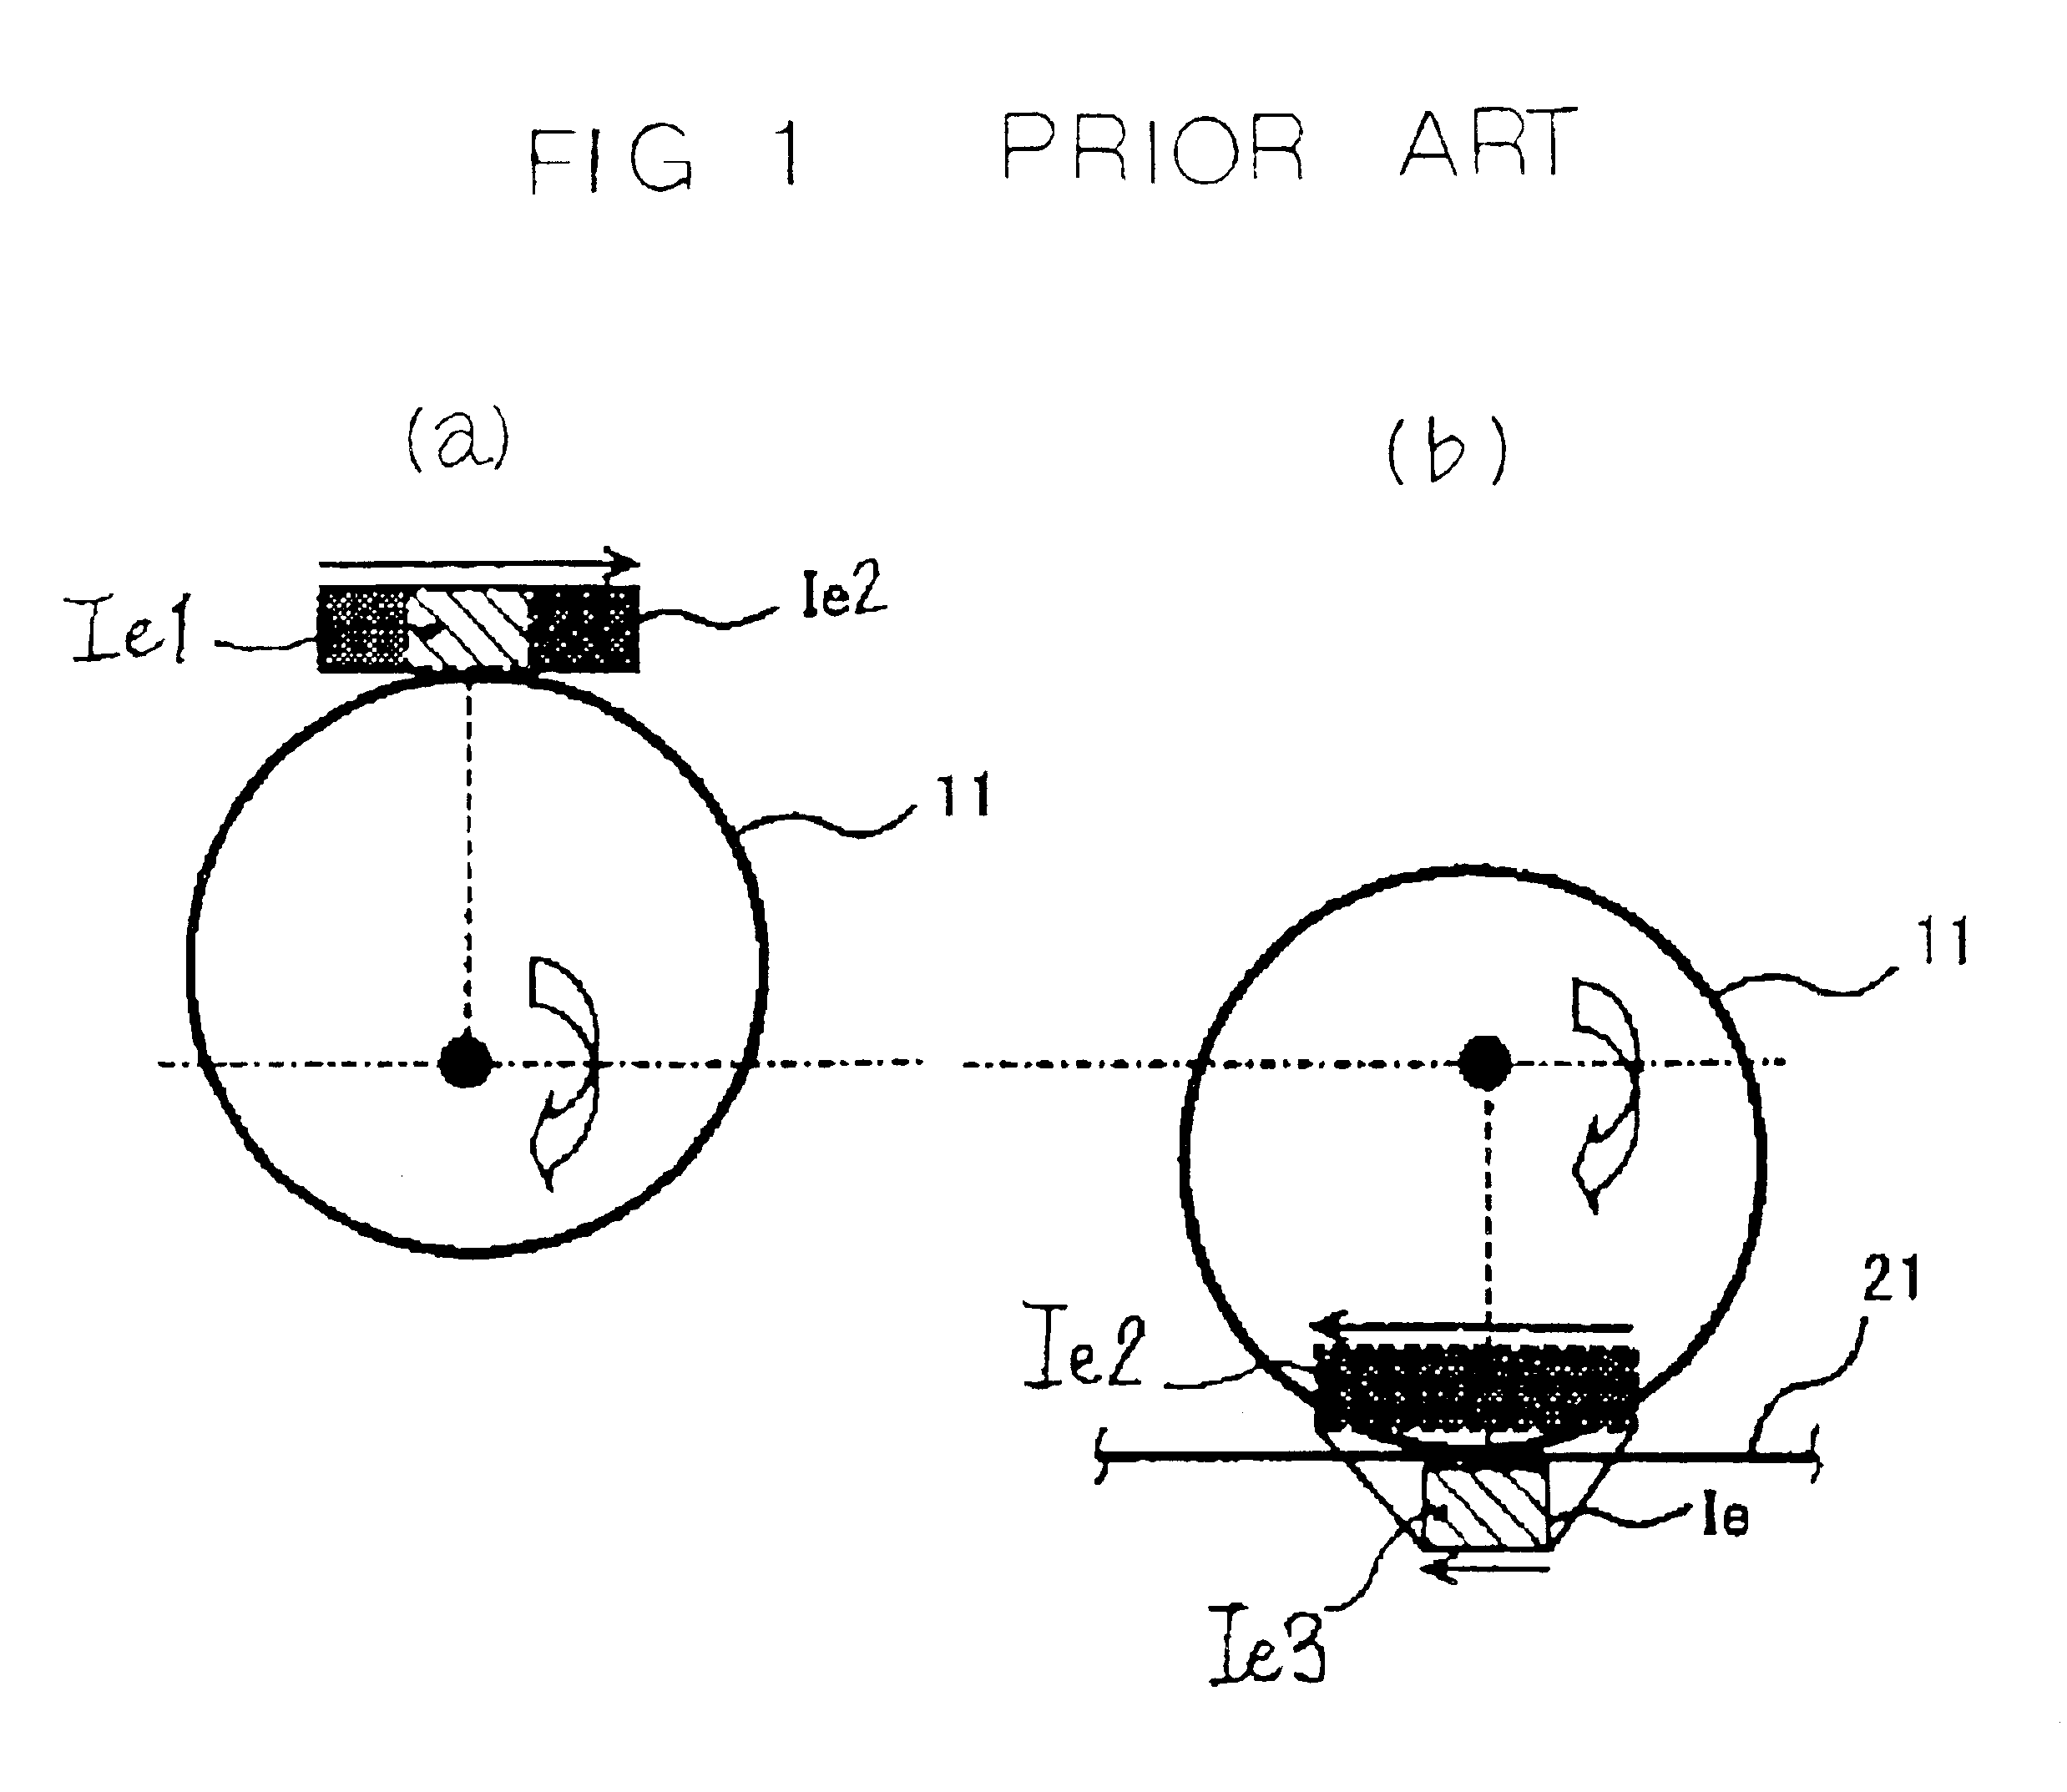 Image forming apparatus with an intermediate image transfer body and provisions for correcting image transfer distortions